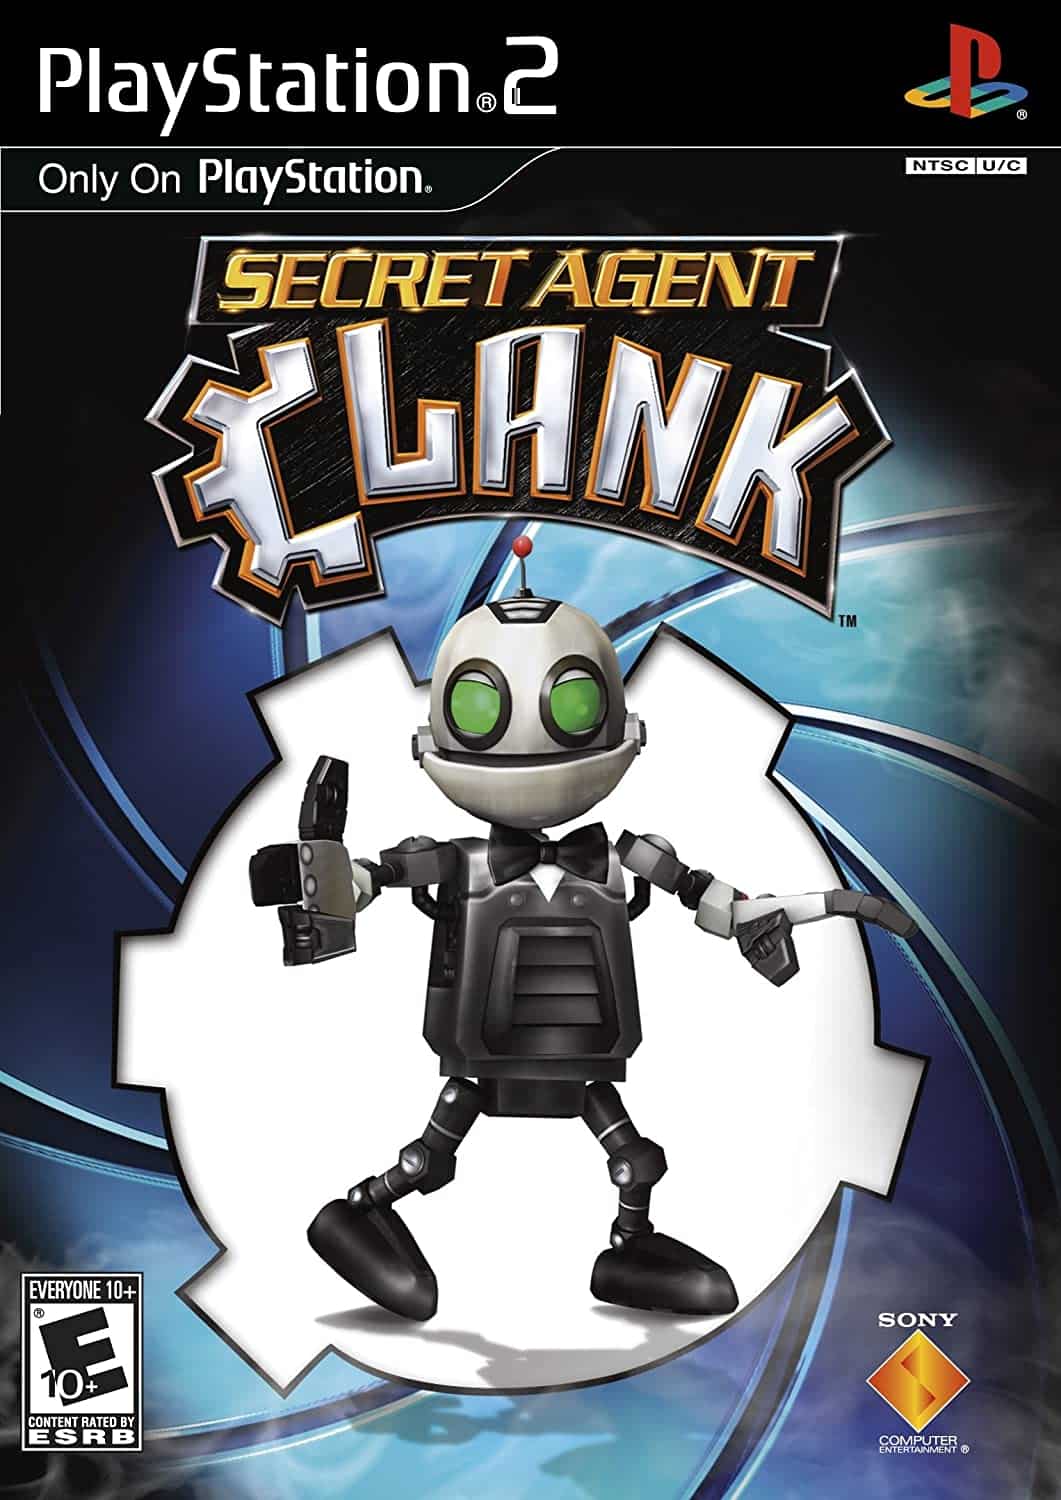 Secret Agent Clank player count stats